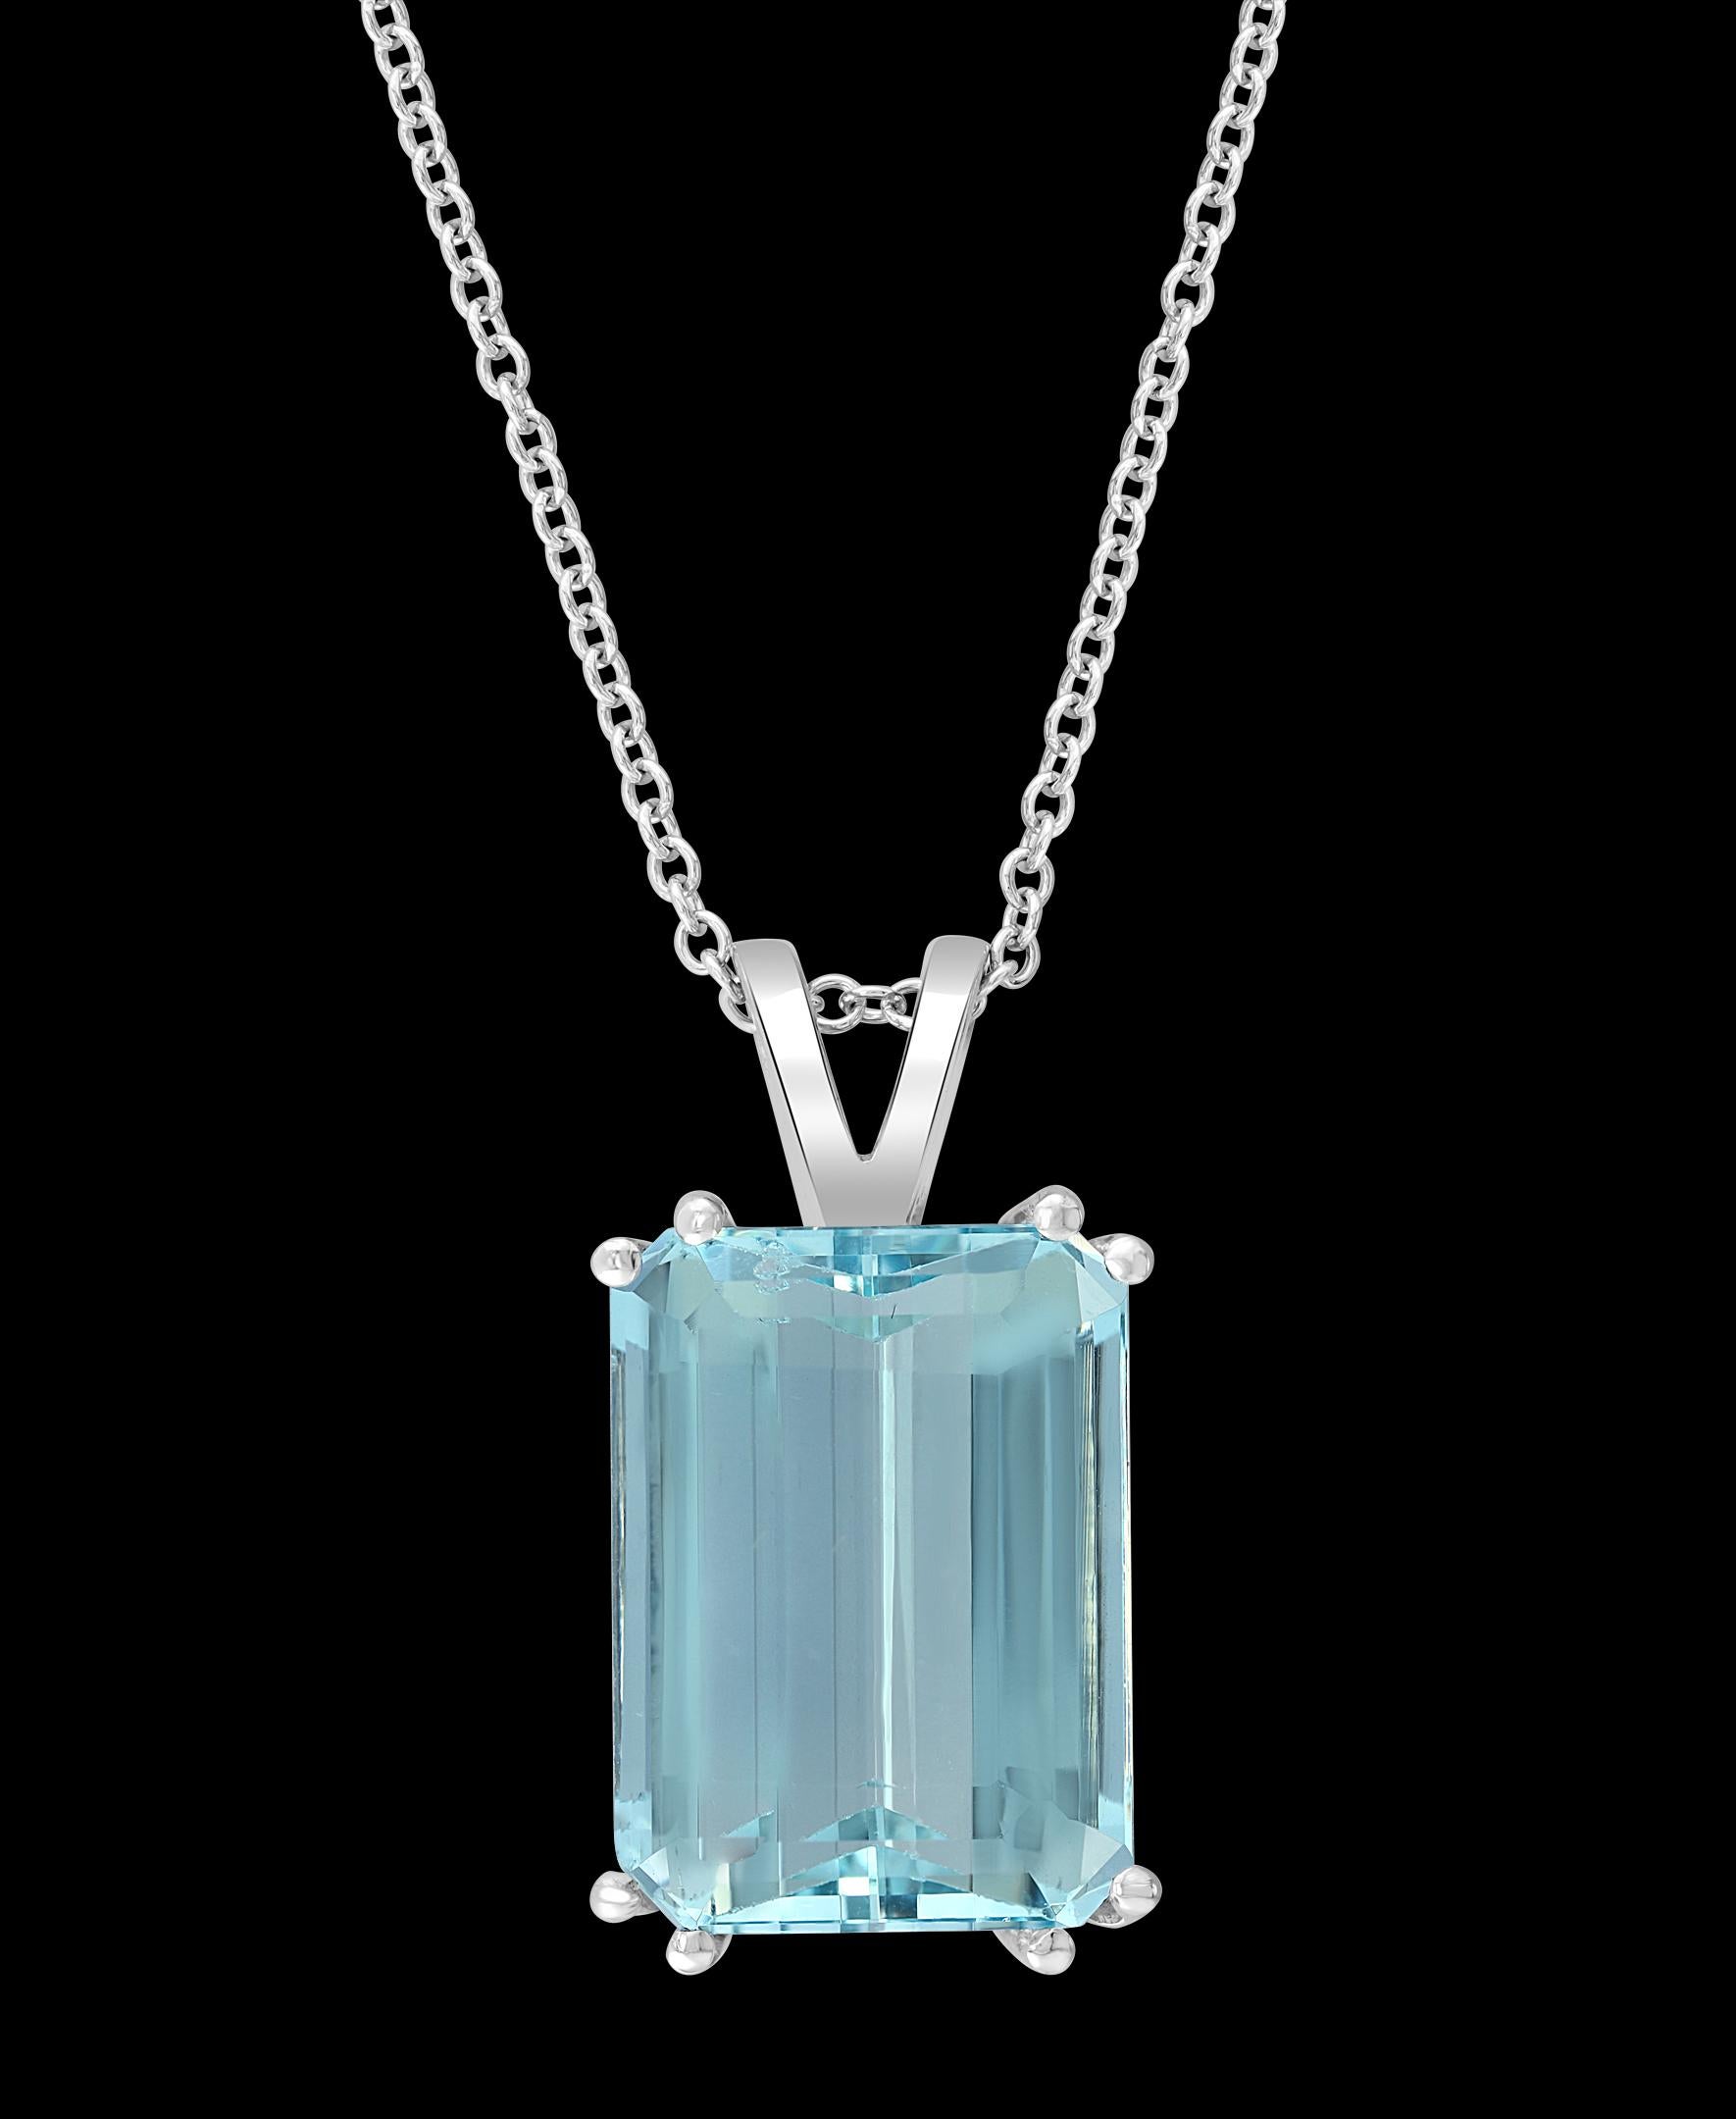 Approximately 6 Carat (or bigger ) Emerald Cut Aquamarine Pendant / Necklace 14 Karat White Gold
This spectacular Pendant Necklace  consisting of a single Emerald cut   Aquamarine approximately 6 Carat.  The  Aquamarine  size  10 X 14.5 MM is 
very